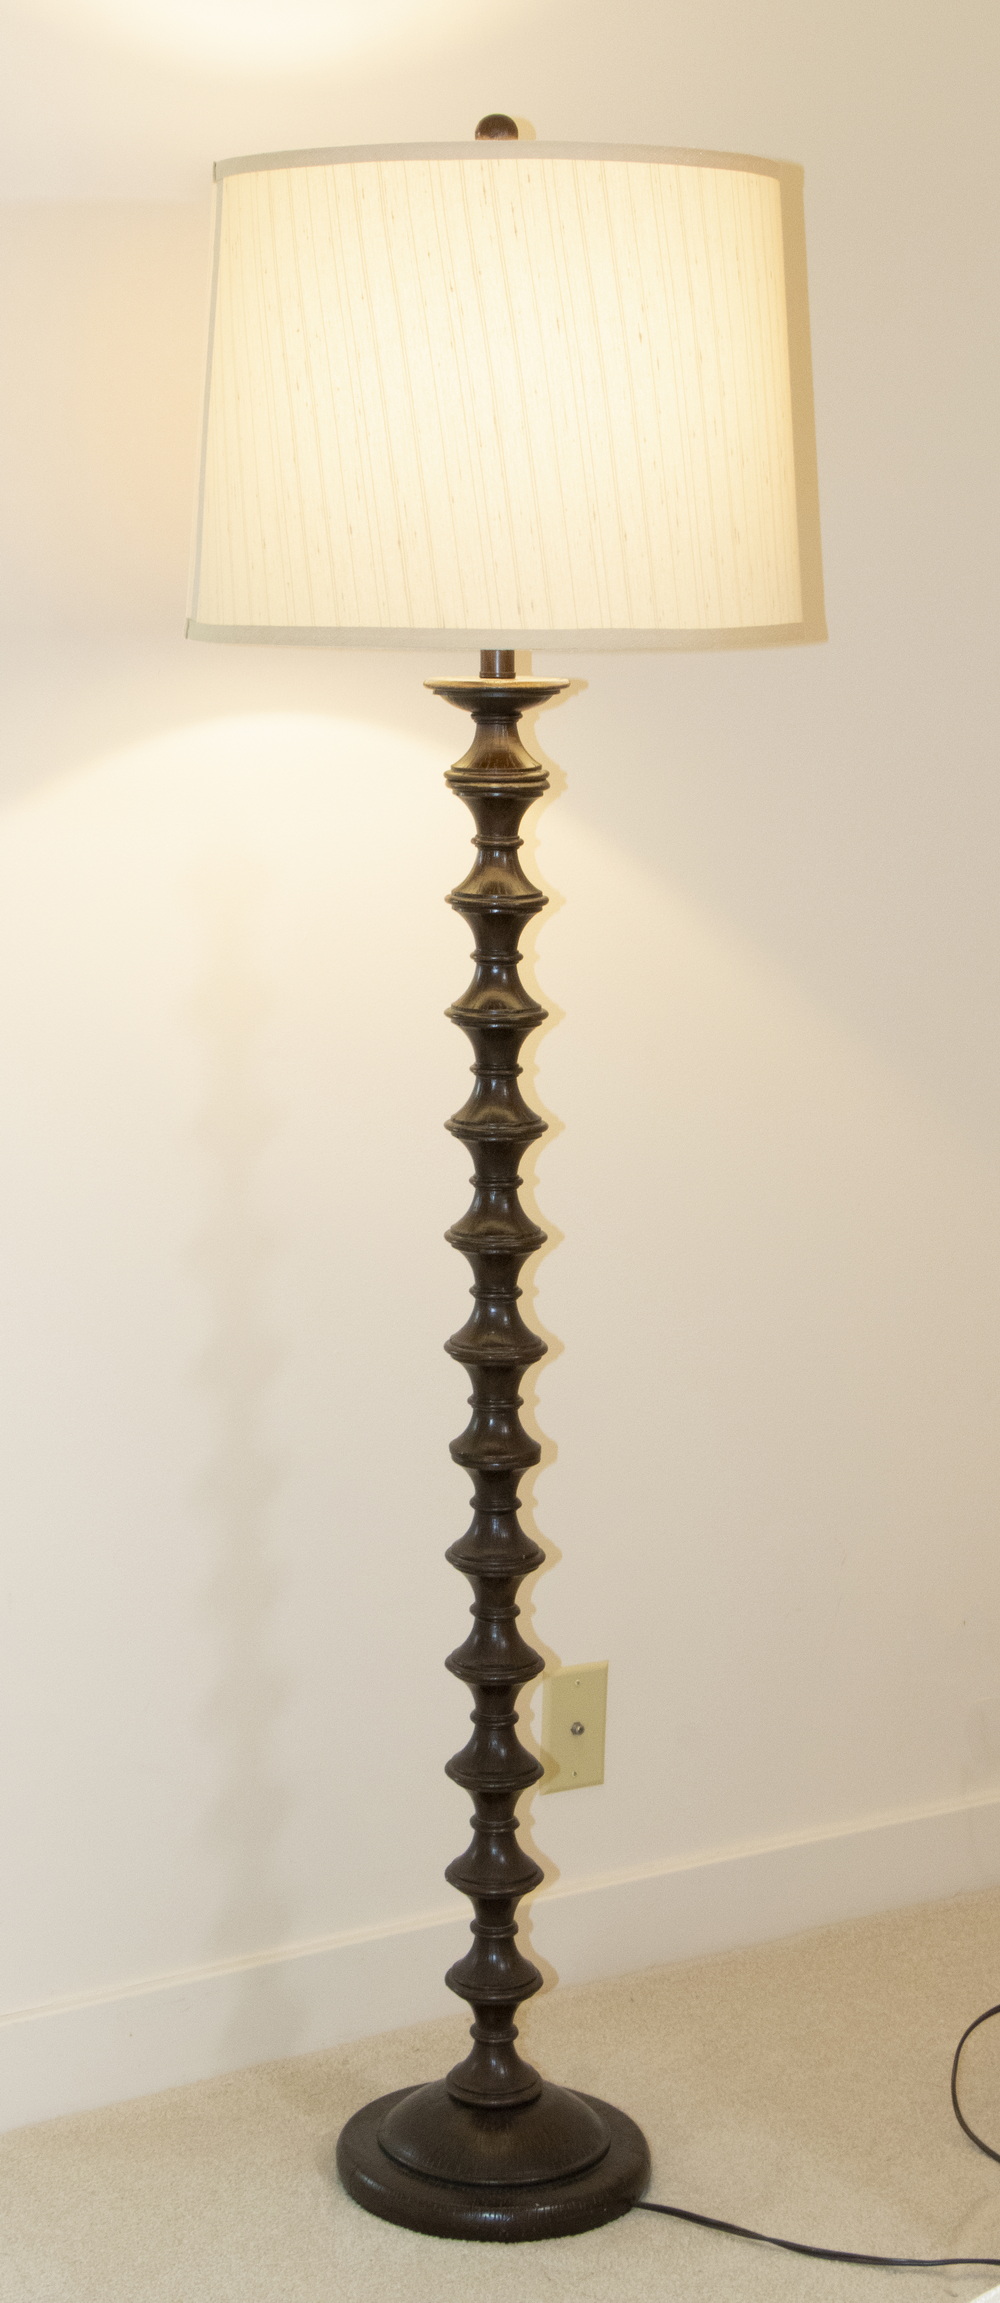 CARVED WOODEN FLOOR LAMP Dark-stained